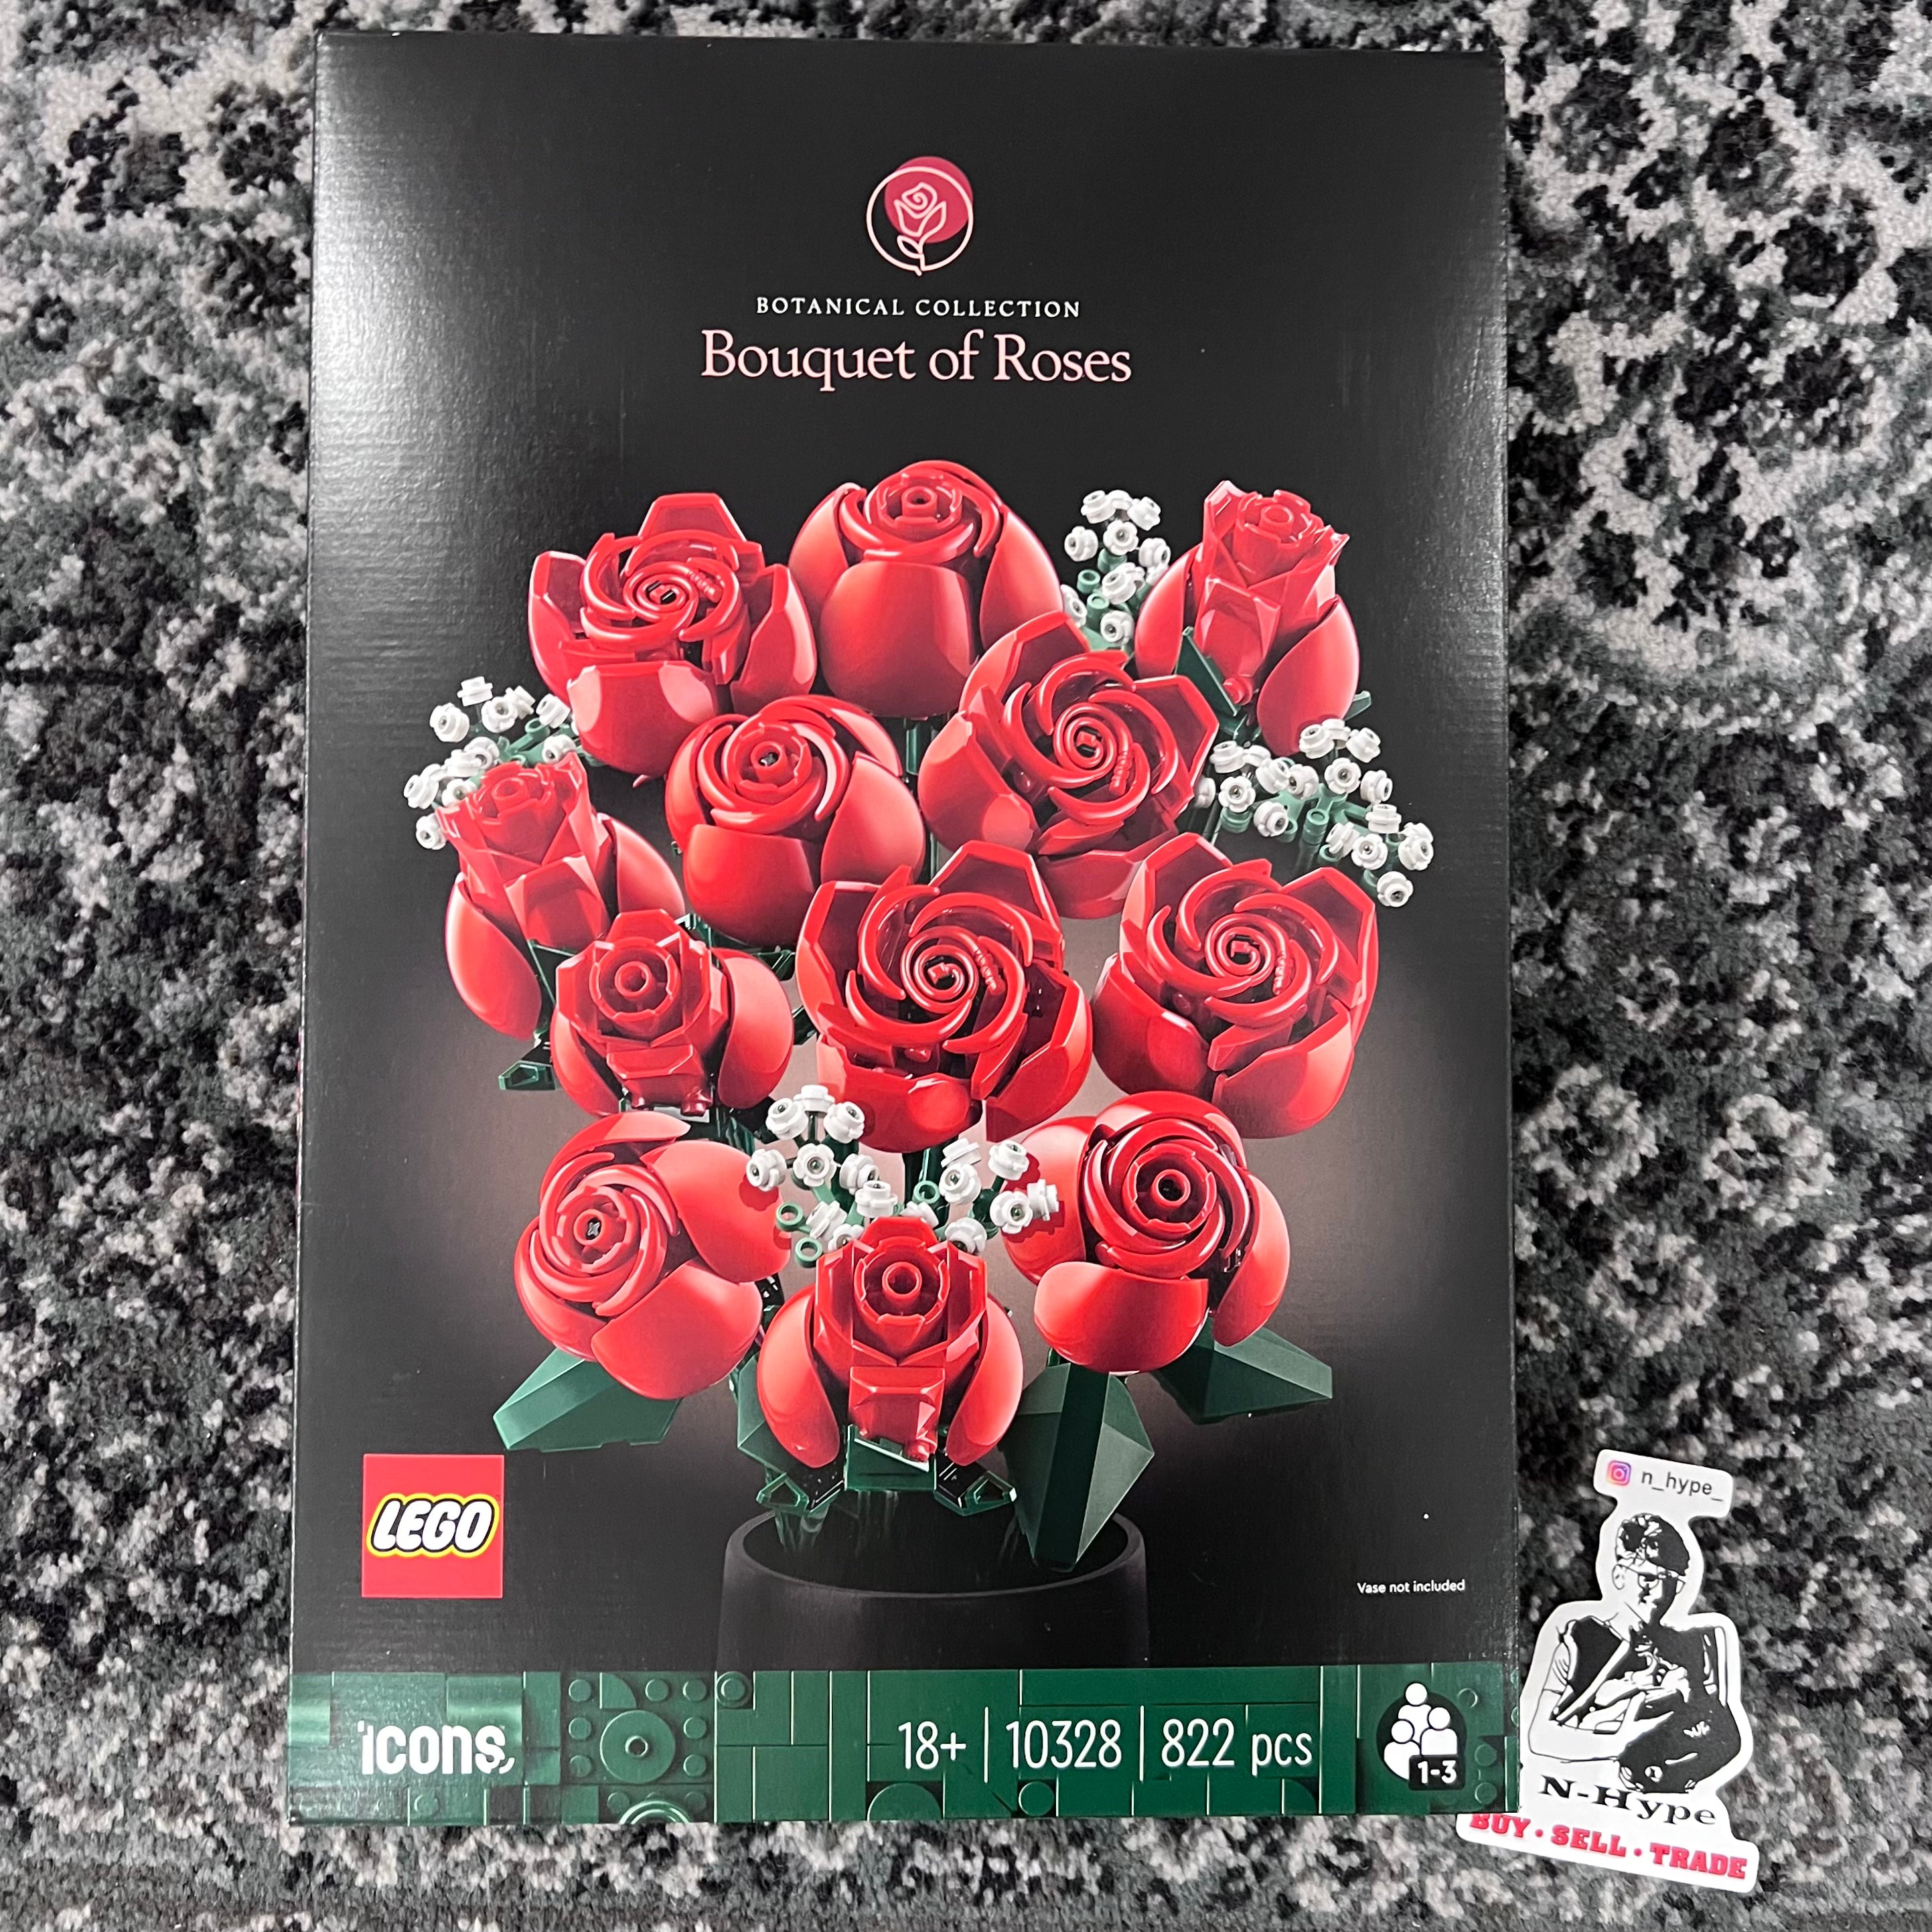 LEGO Bouquet of Roses - Botanical Collection 10328' Showroom NHype Lodz Polska 3